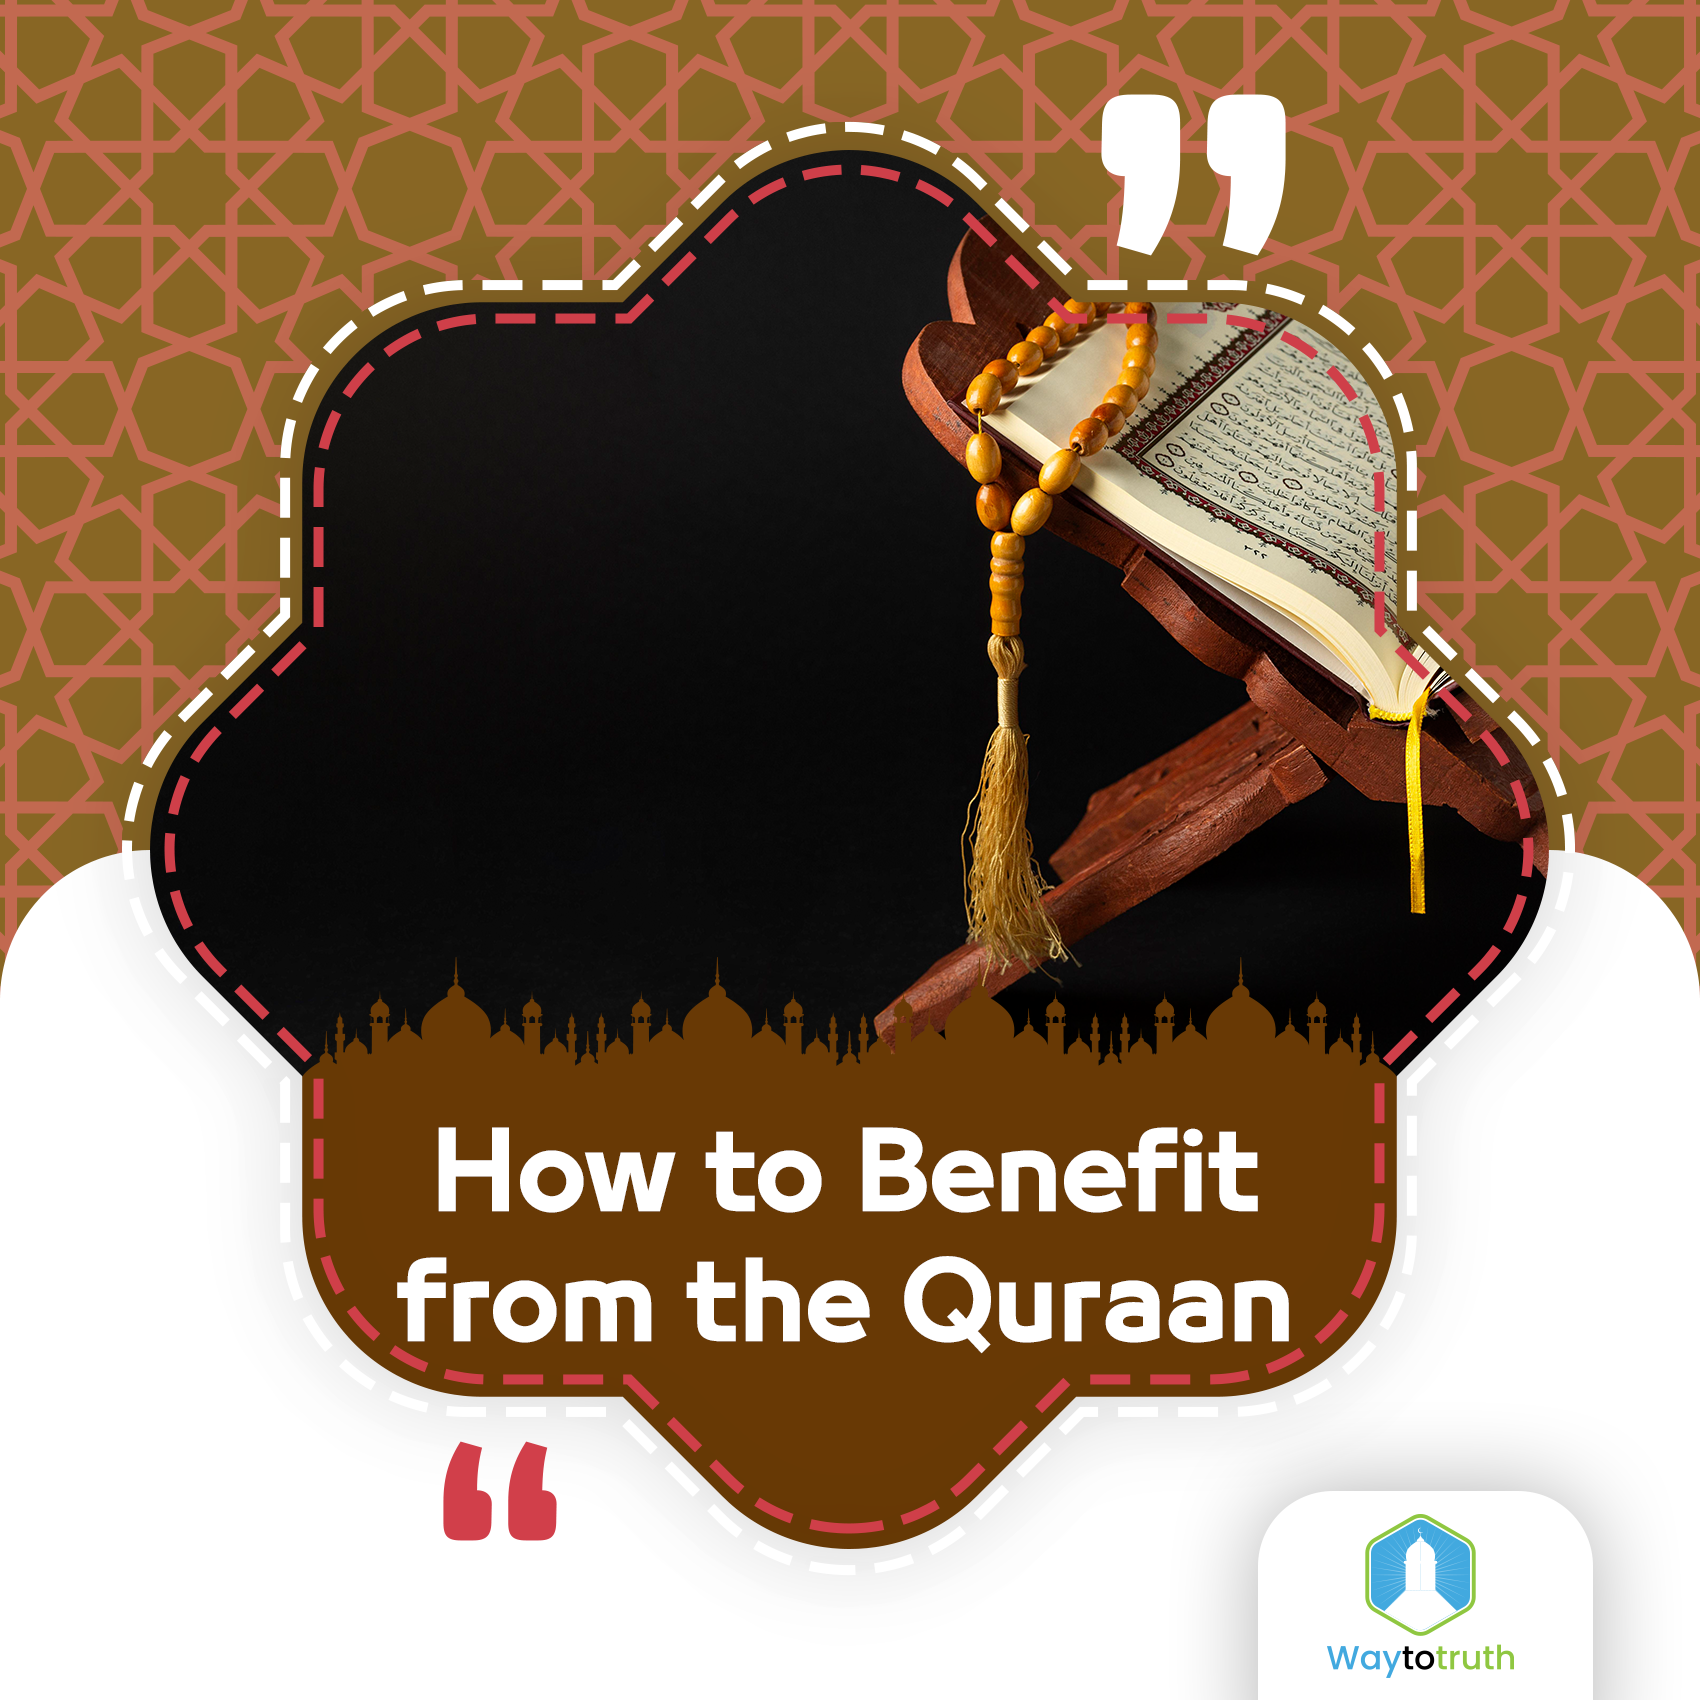 How to Benefit from the Quraan